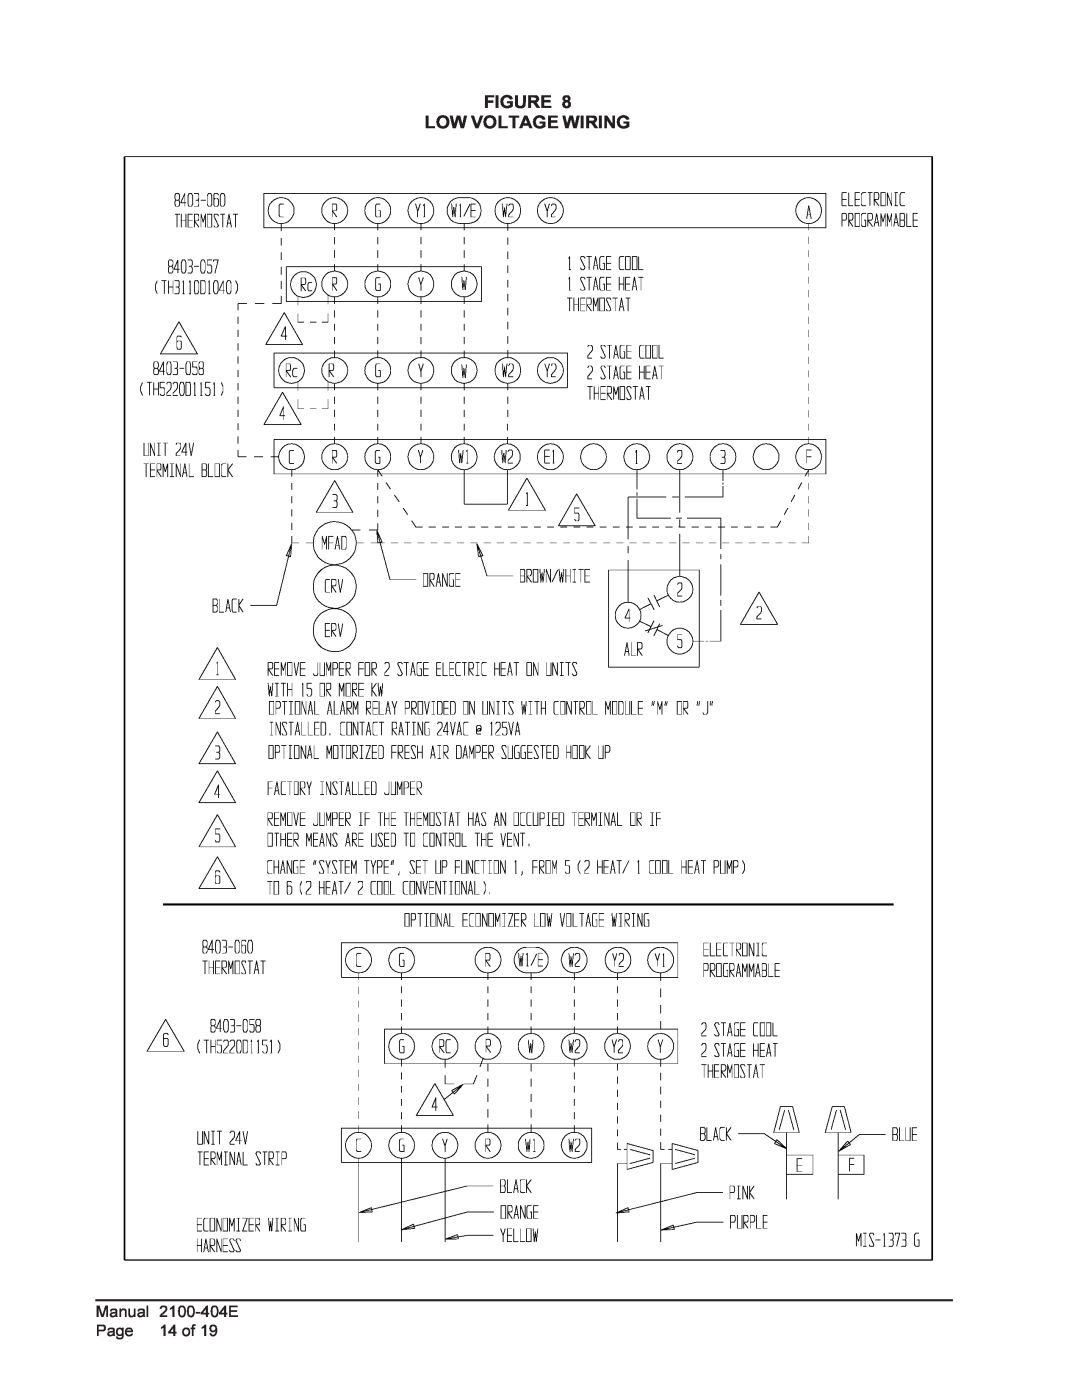 Bard 2100-404E installation instructions Figure Low Voltage Wiring, Manual, Page, 14 of 